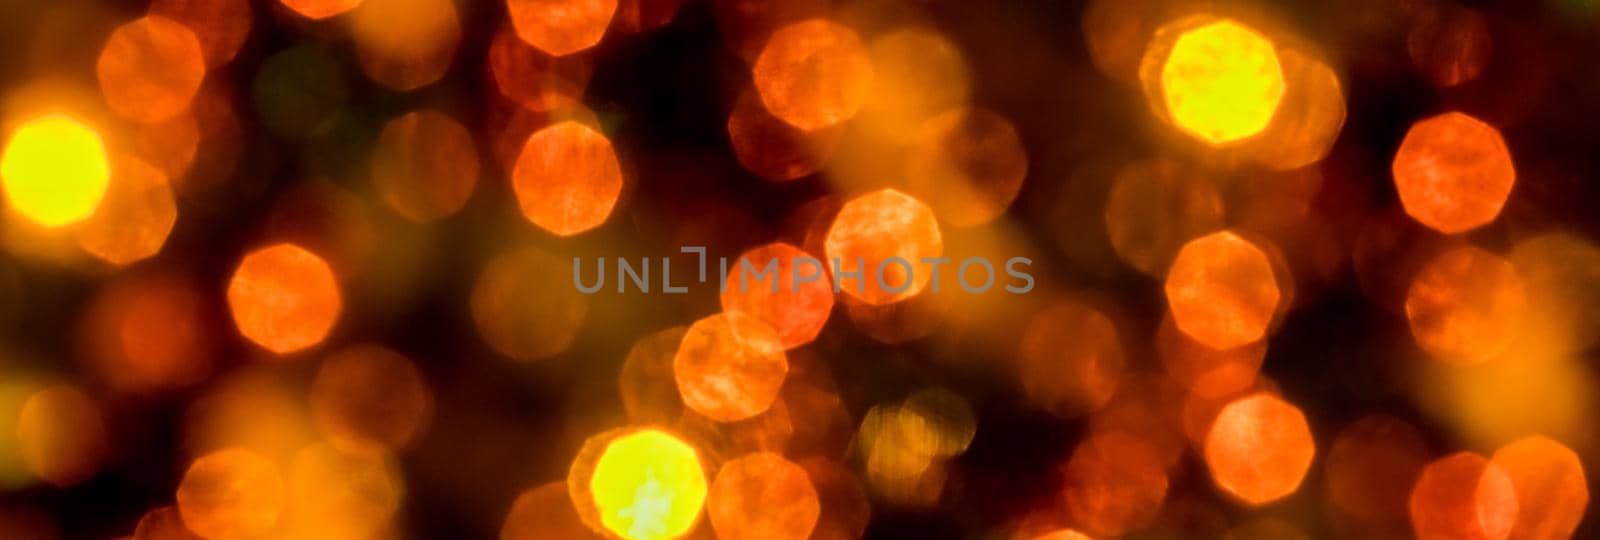 yellow and orange holiday bokeh. Abstract Christmas background.Christmas and New Year holidays background. Blurred Bokeh.Web banner by YuliaYaspe1979